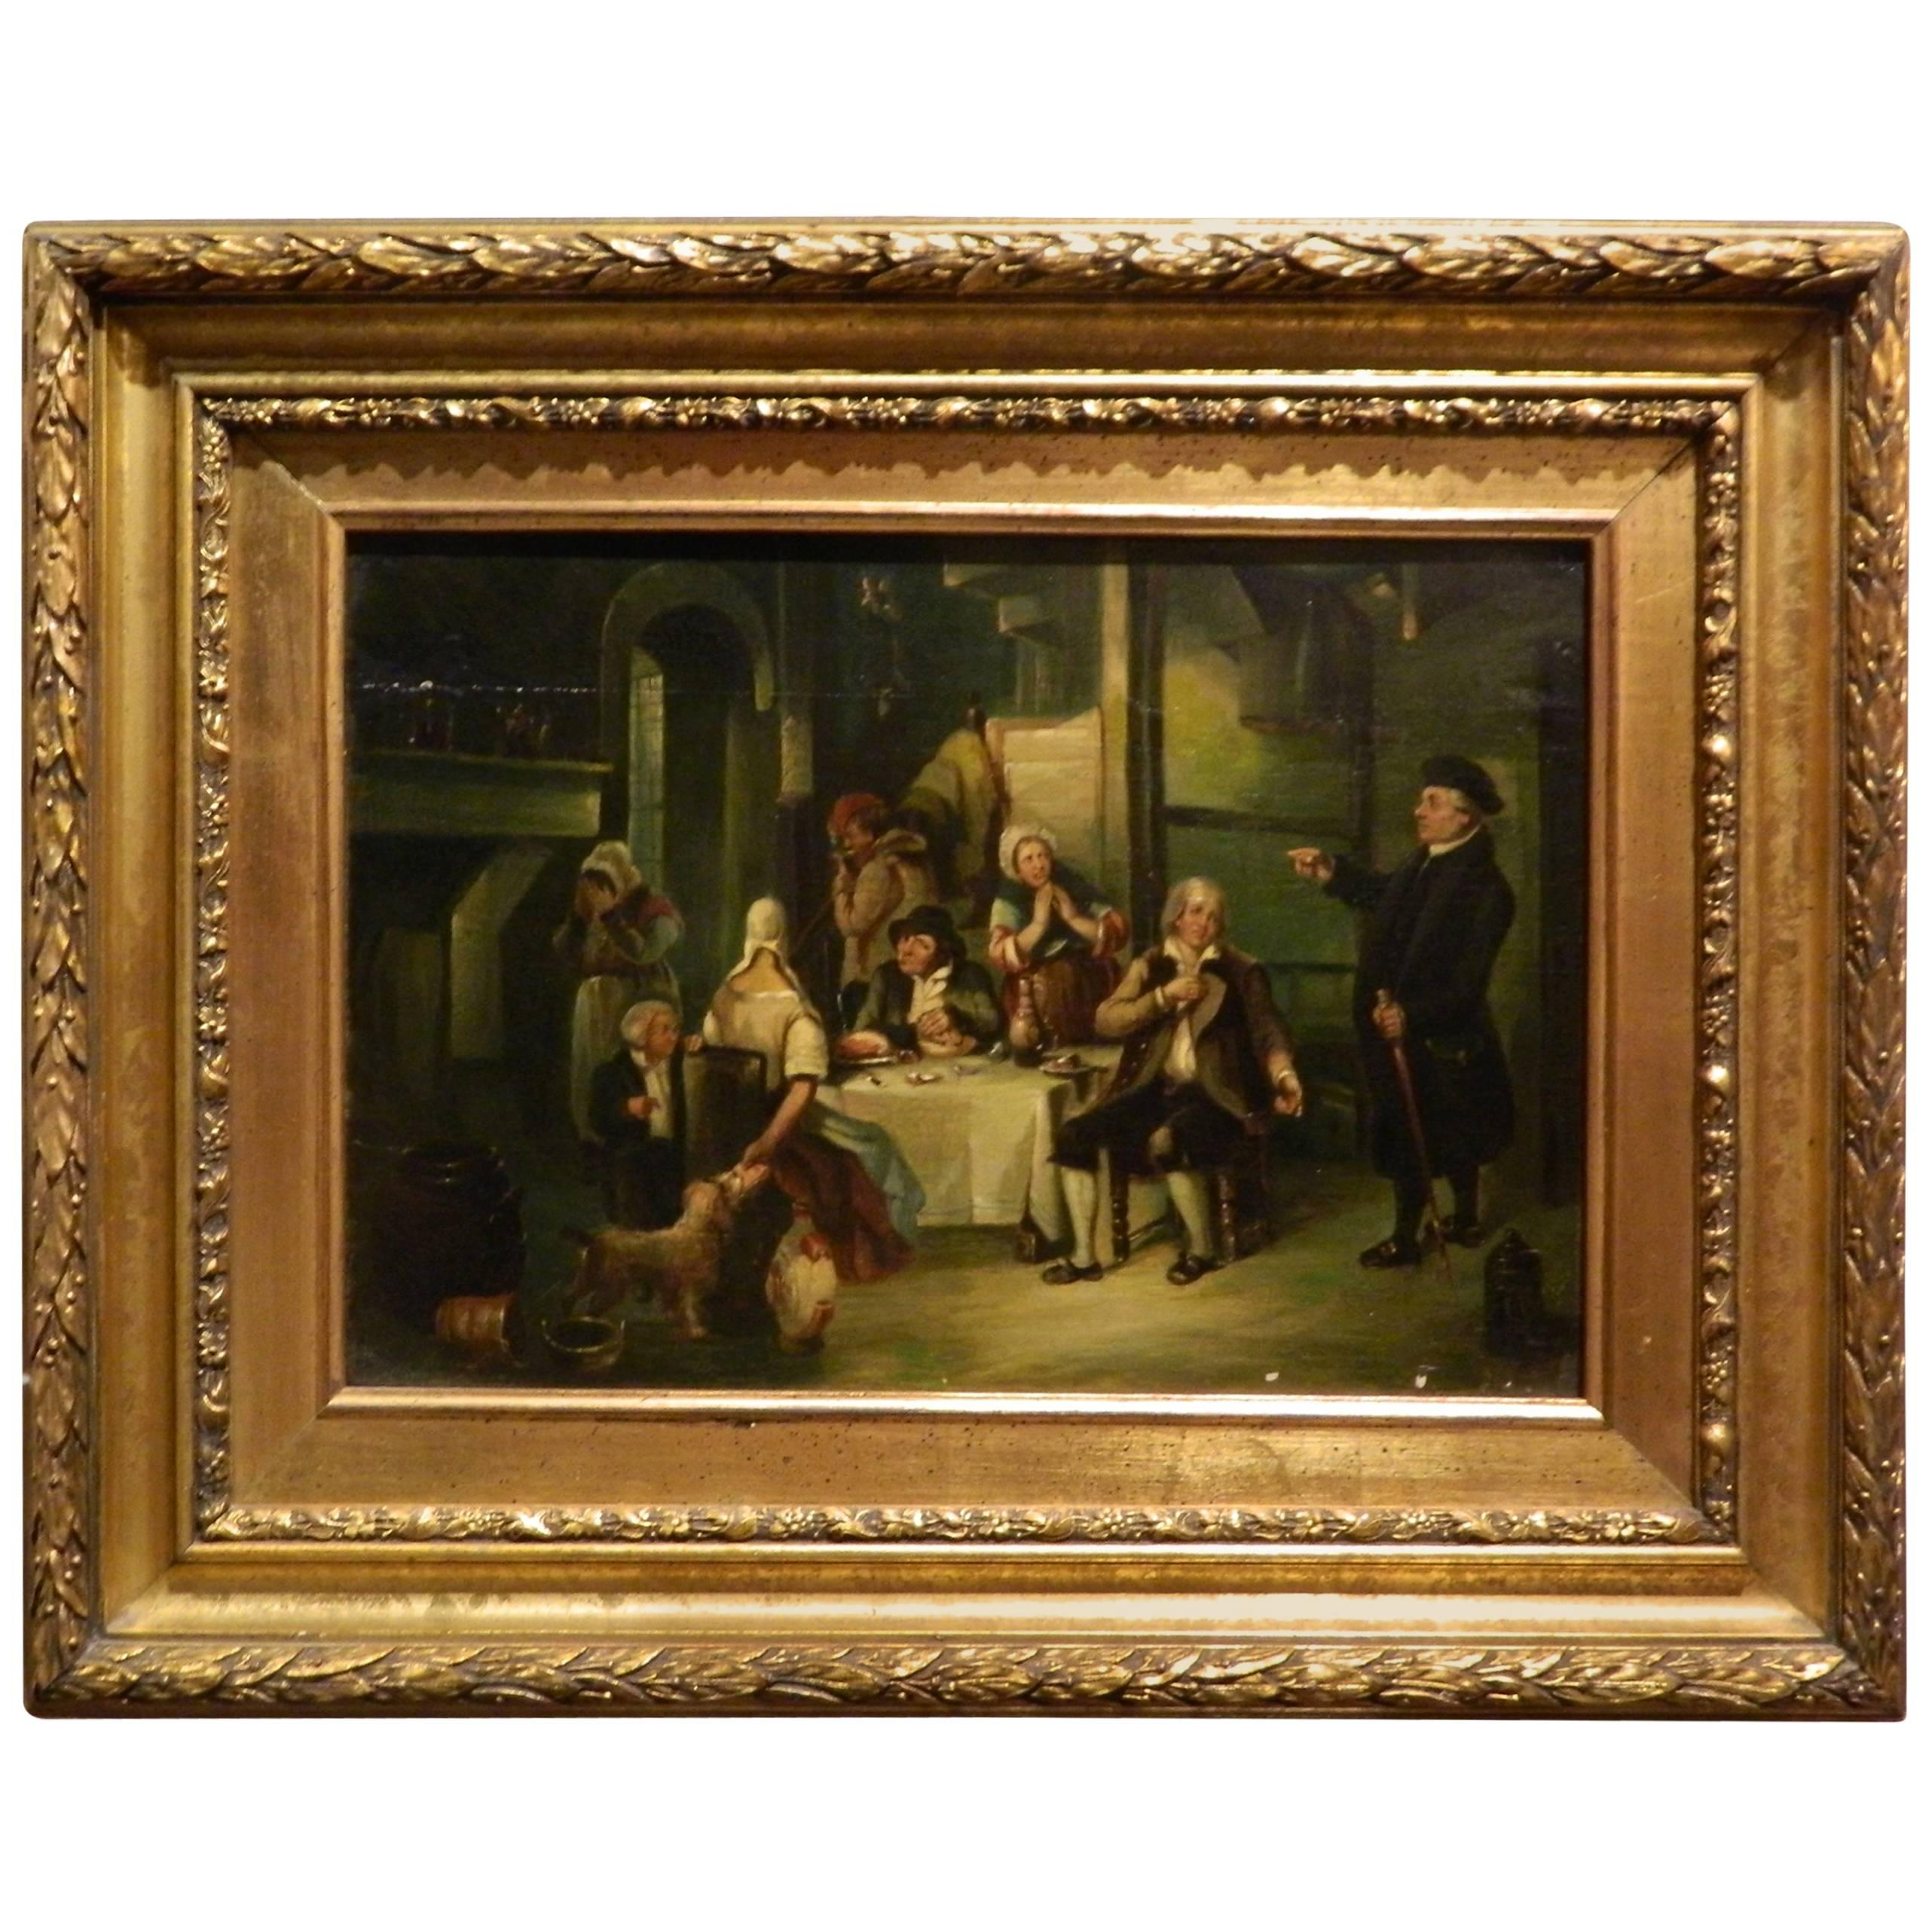 Oil on Board "At Dinner" by Sir David Wilkie in a Giltwood Frame, 19th Century